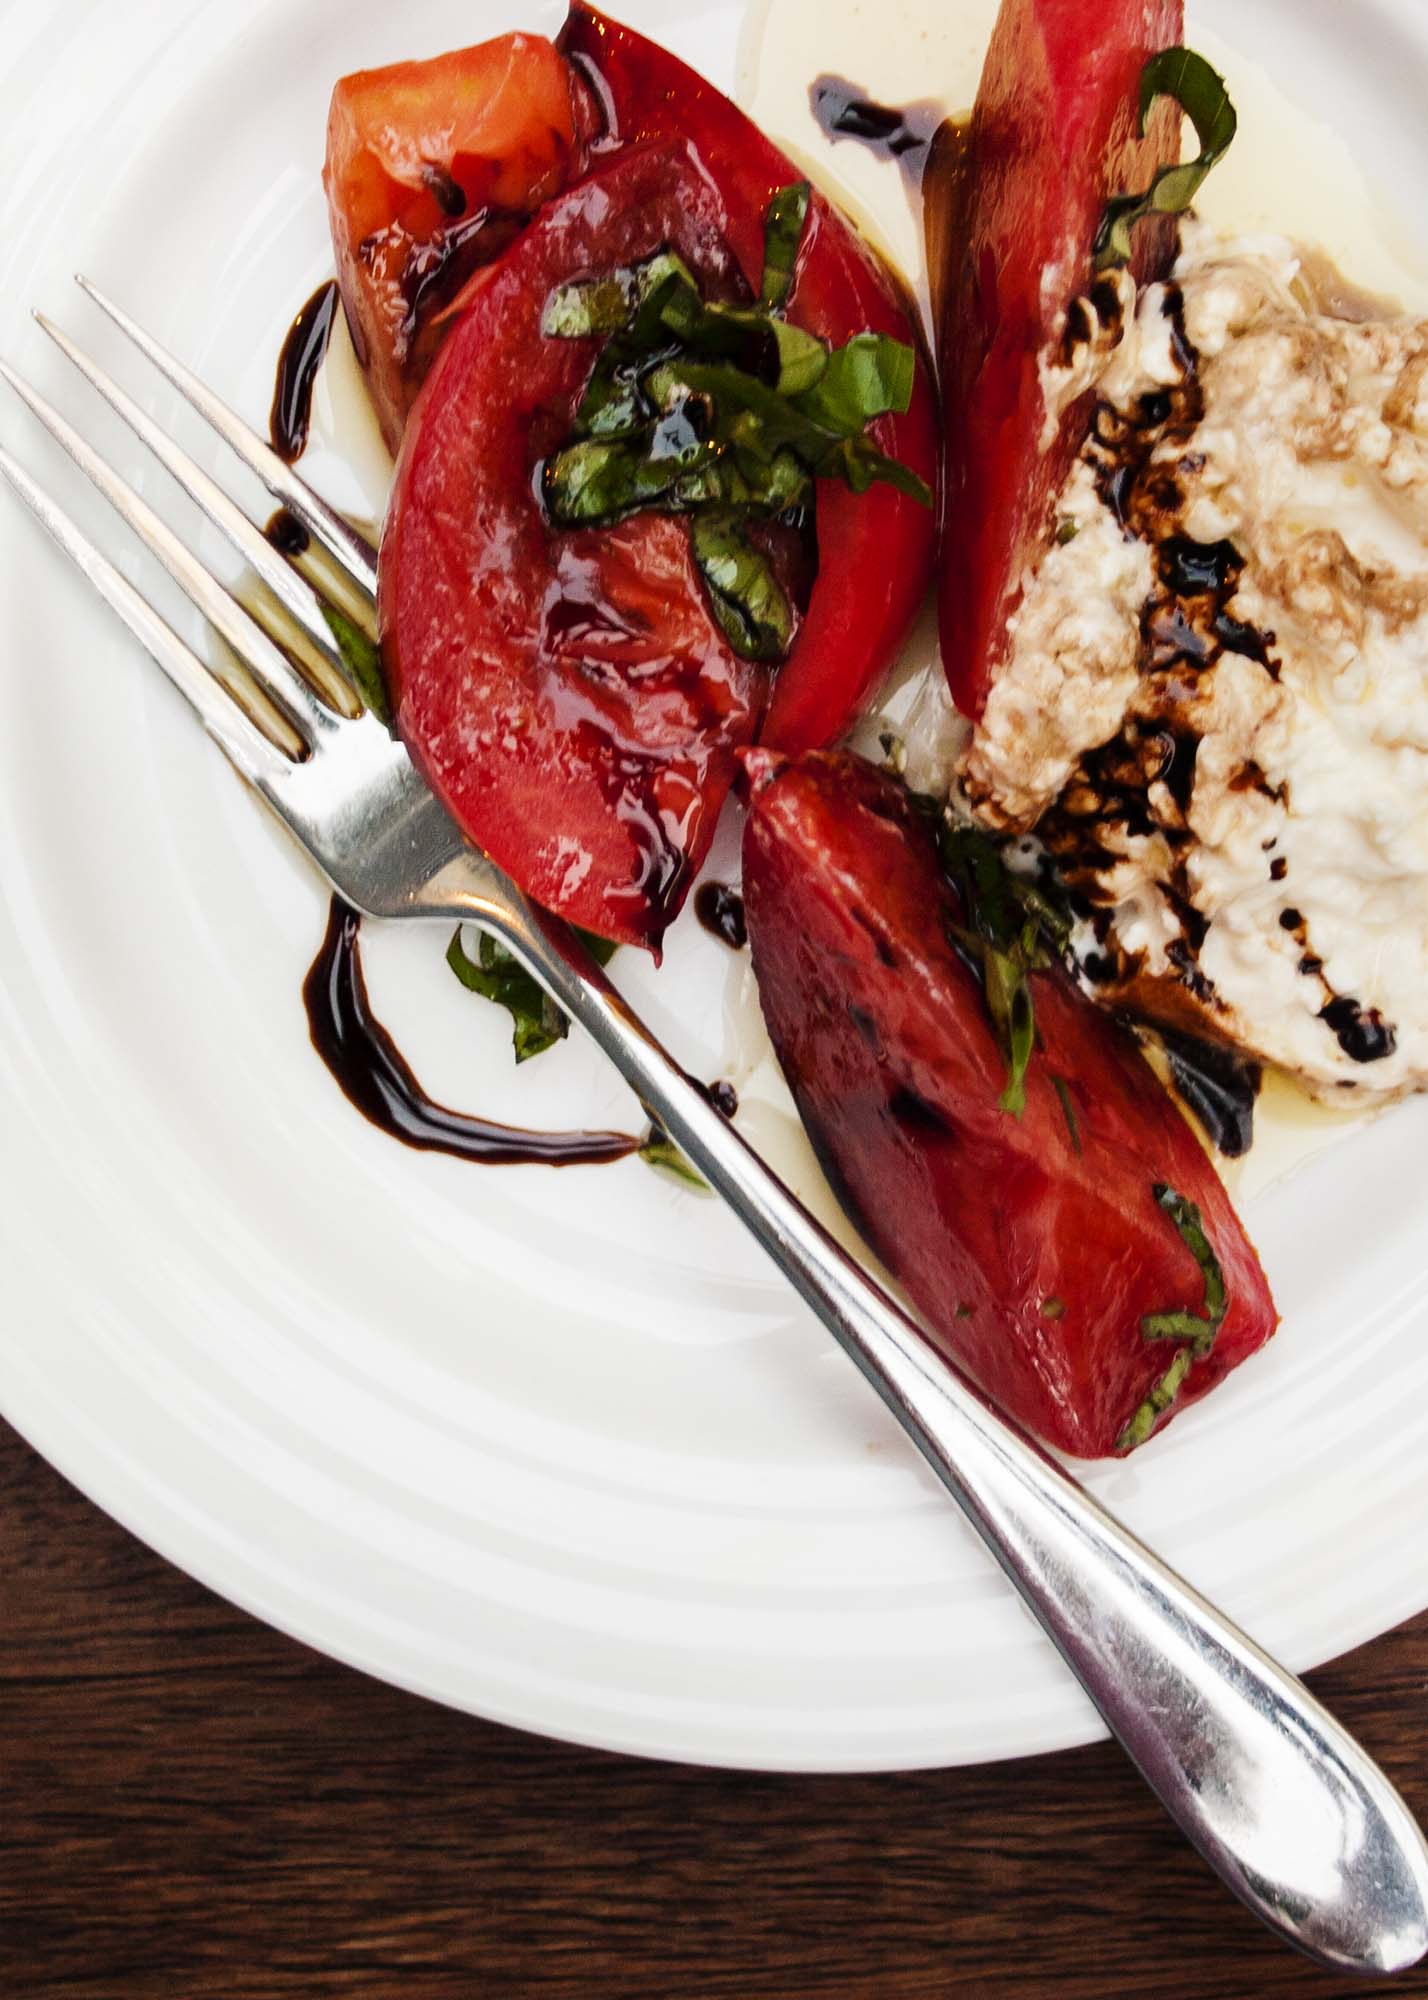 Tomato, Basil Caprese Salad - This salad is an example of taking the freshest ingredients using them simply and producing incredible results. | justalittlebitofbacon.com